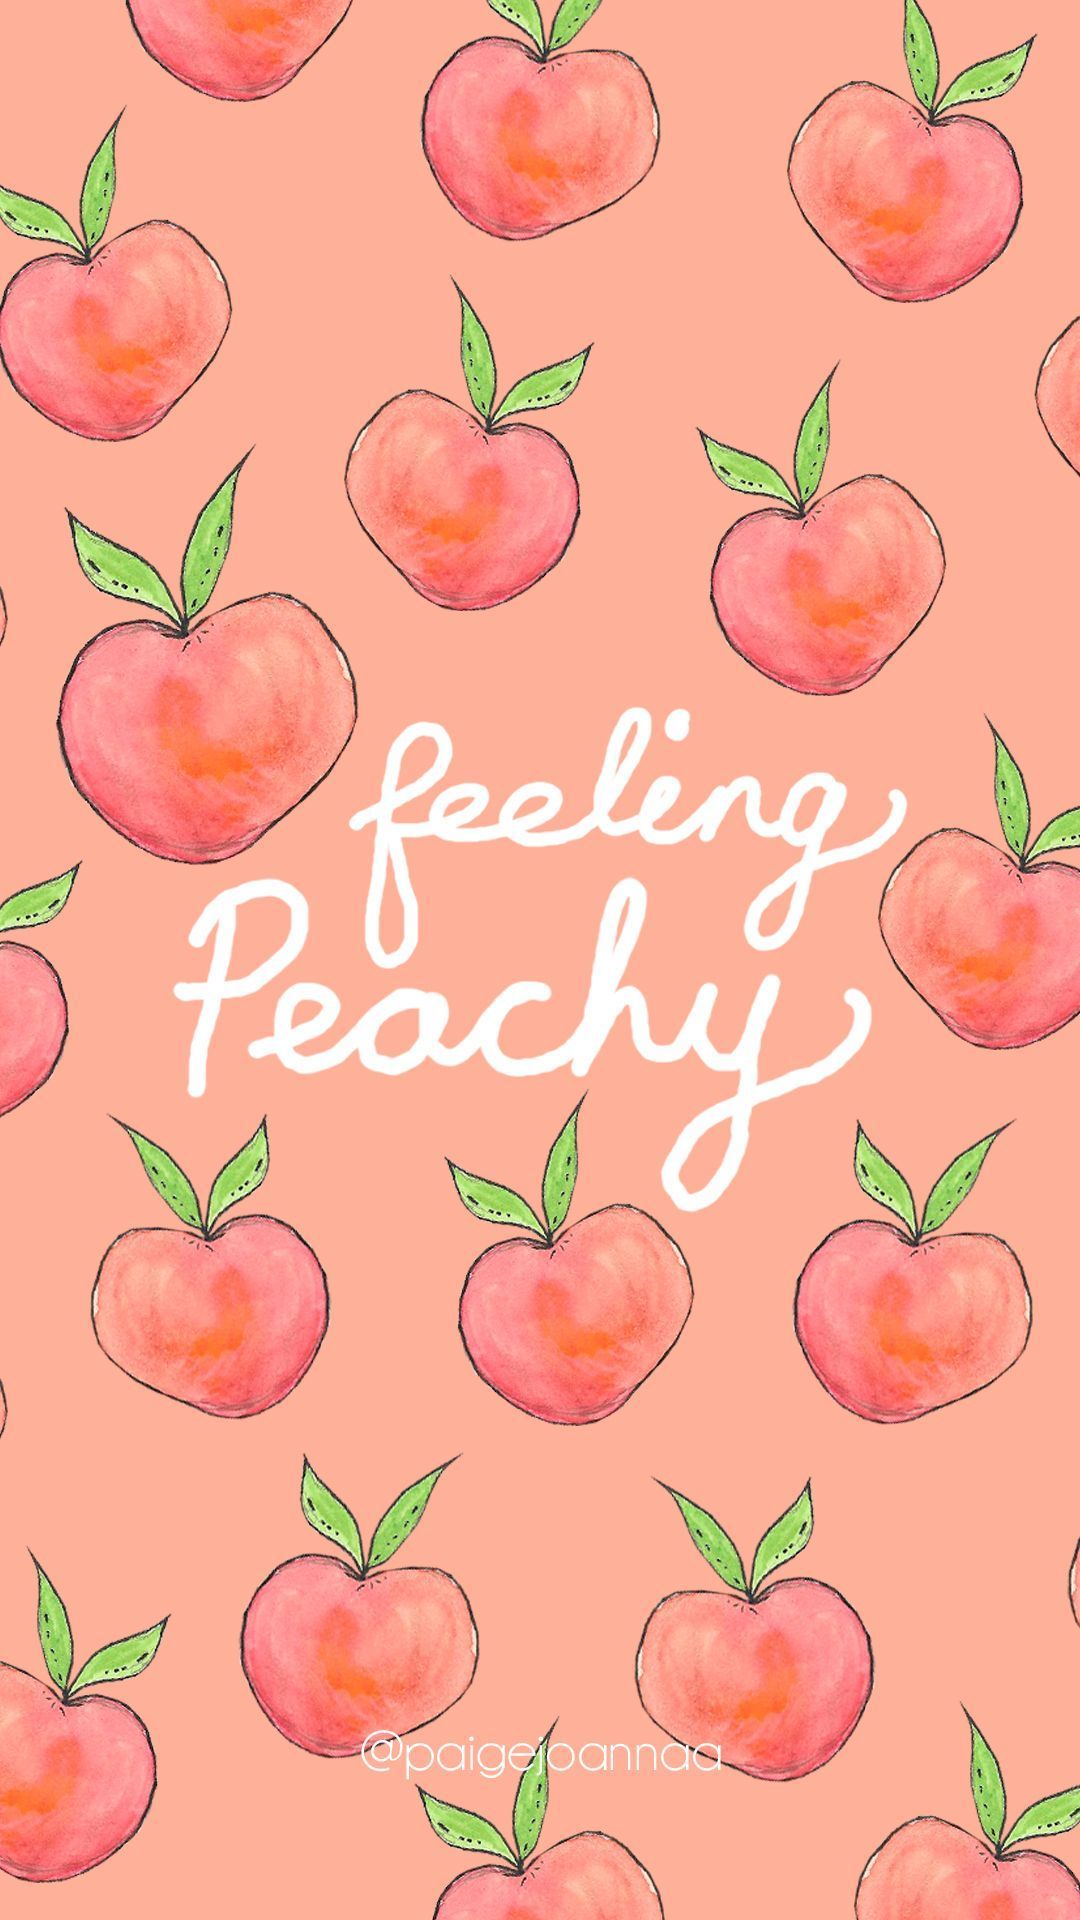 Feeling Peachy Peach phone wallpapers backgrounds.